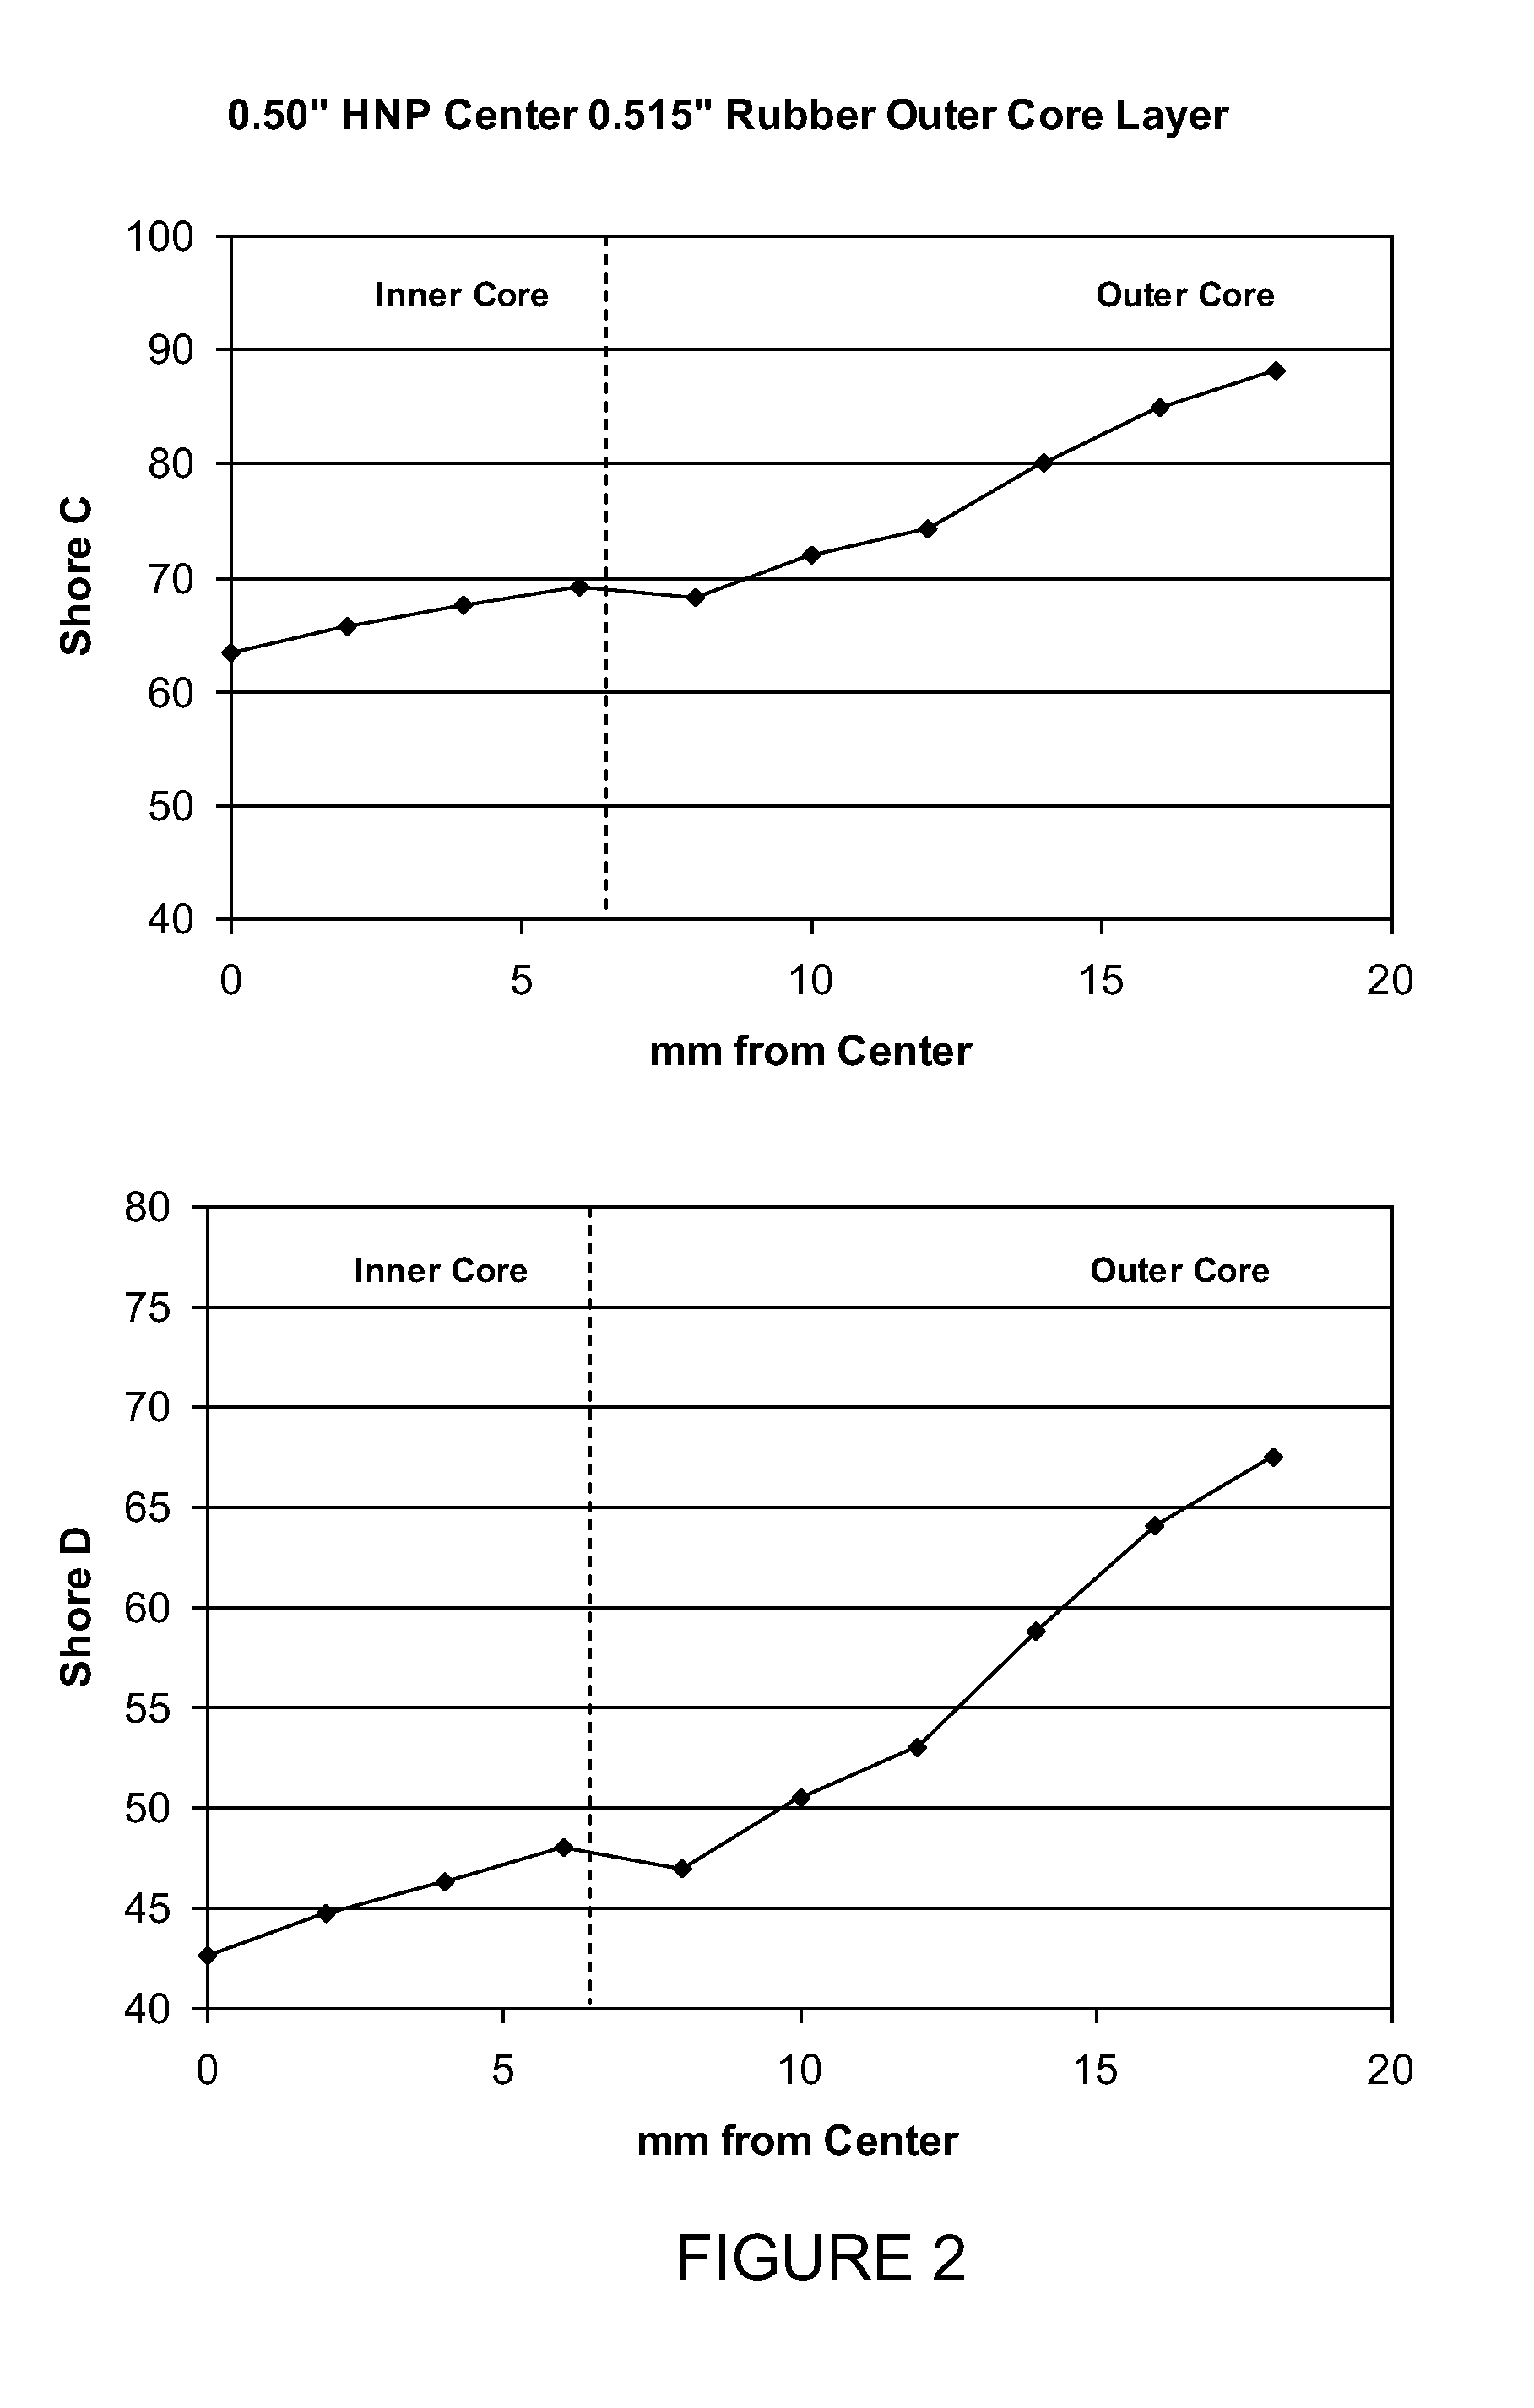 Dual core golf ball having a shallow "positive hardness gradient" thermoplastic inner core and a steep "positive hardness gradient" thermoset outer core layer